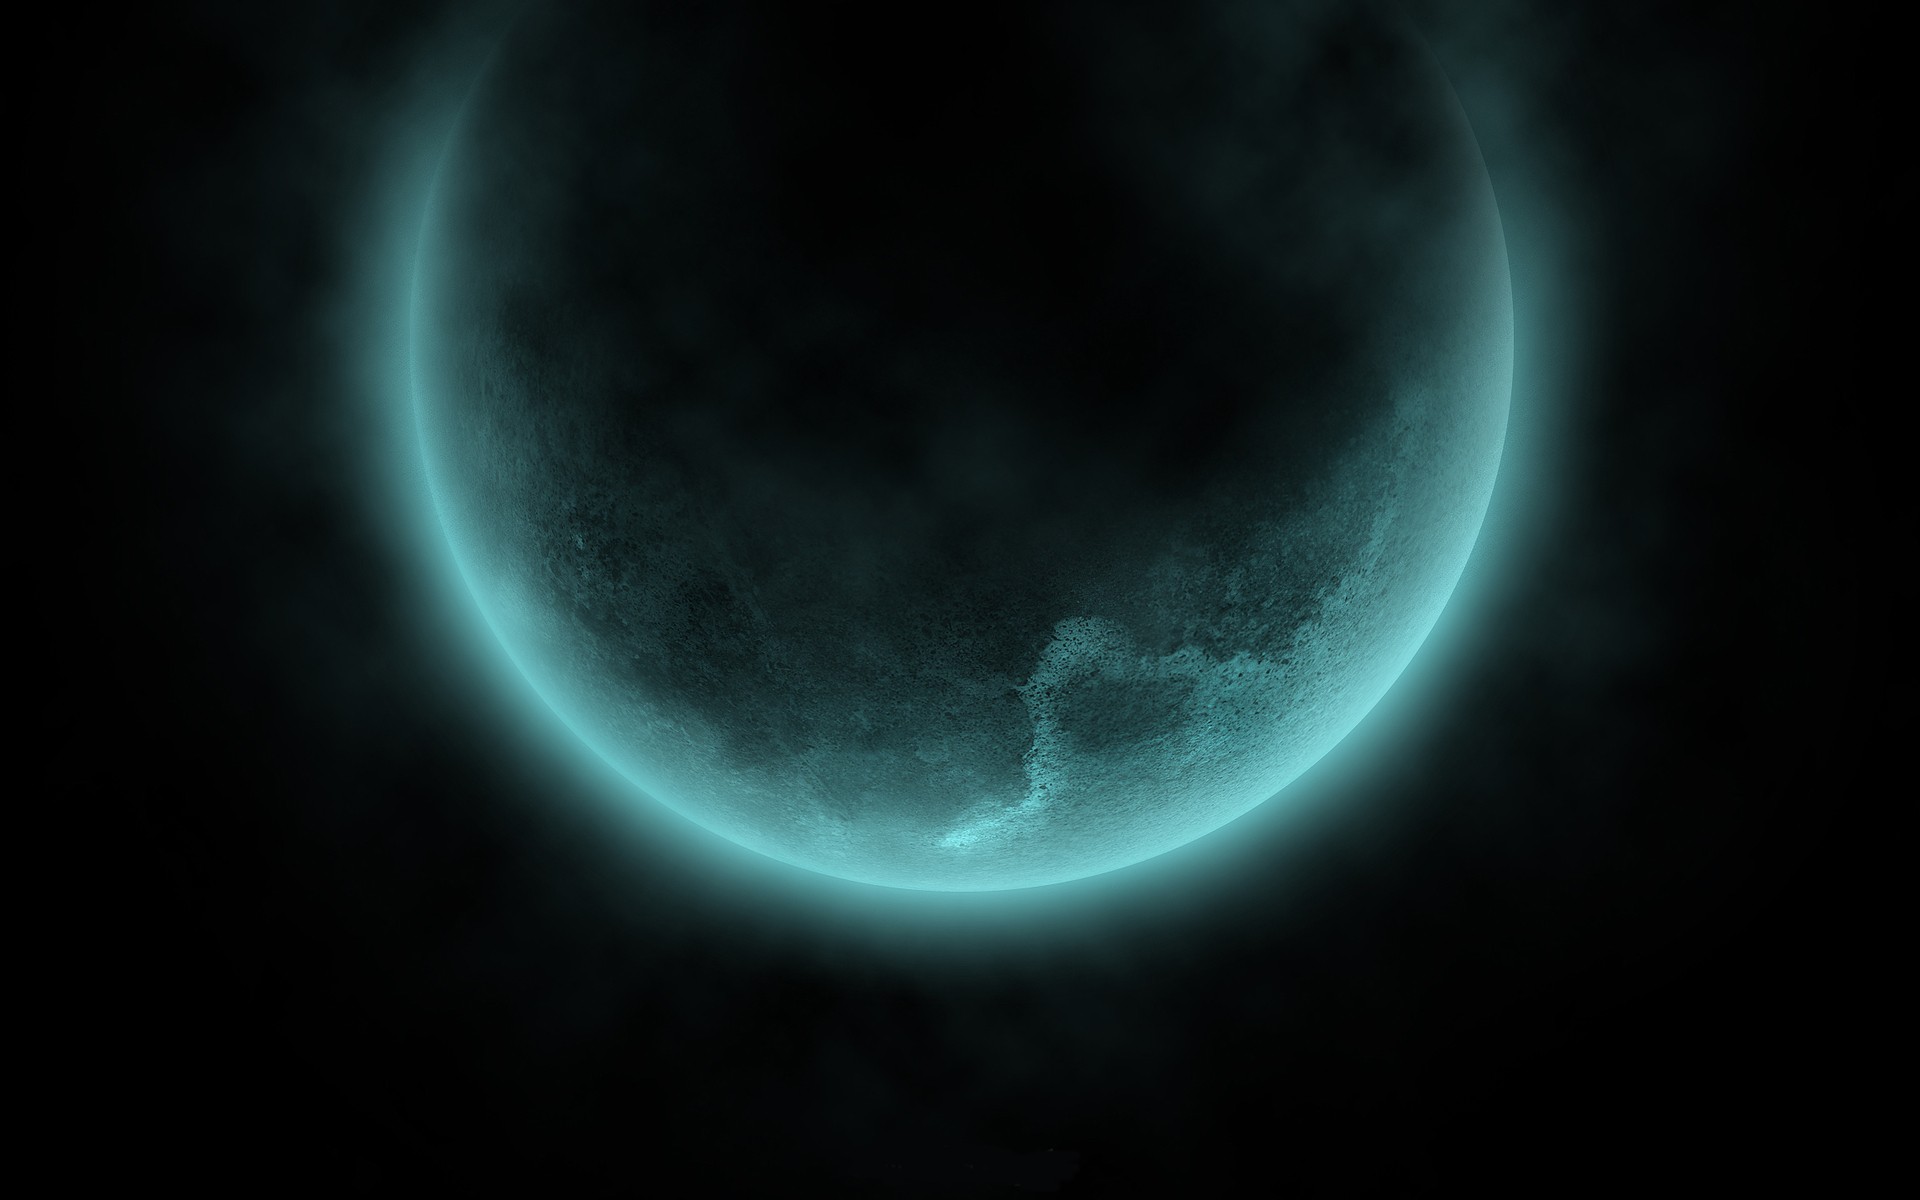 Wallpaper - Turquoise Side Of The Moon - HD Wallpaper 